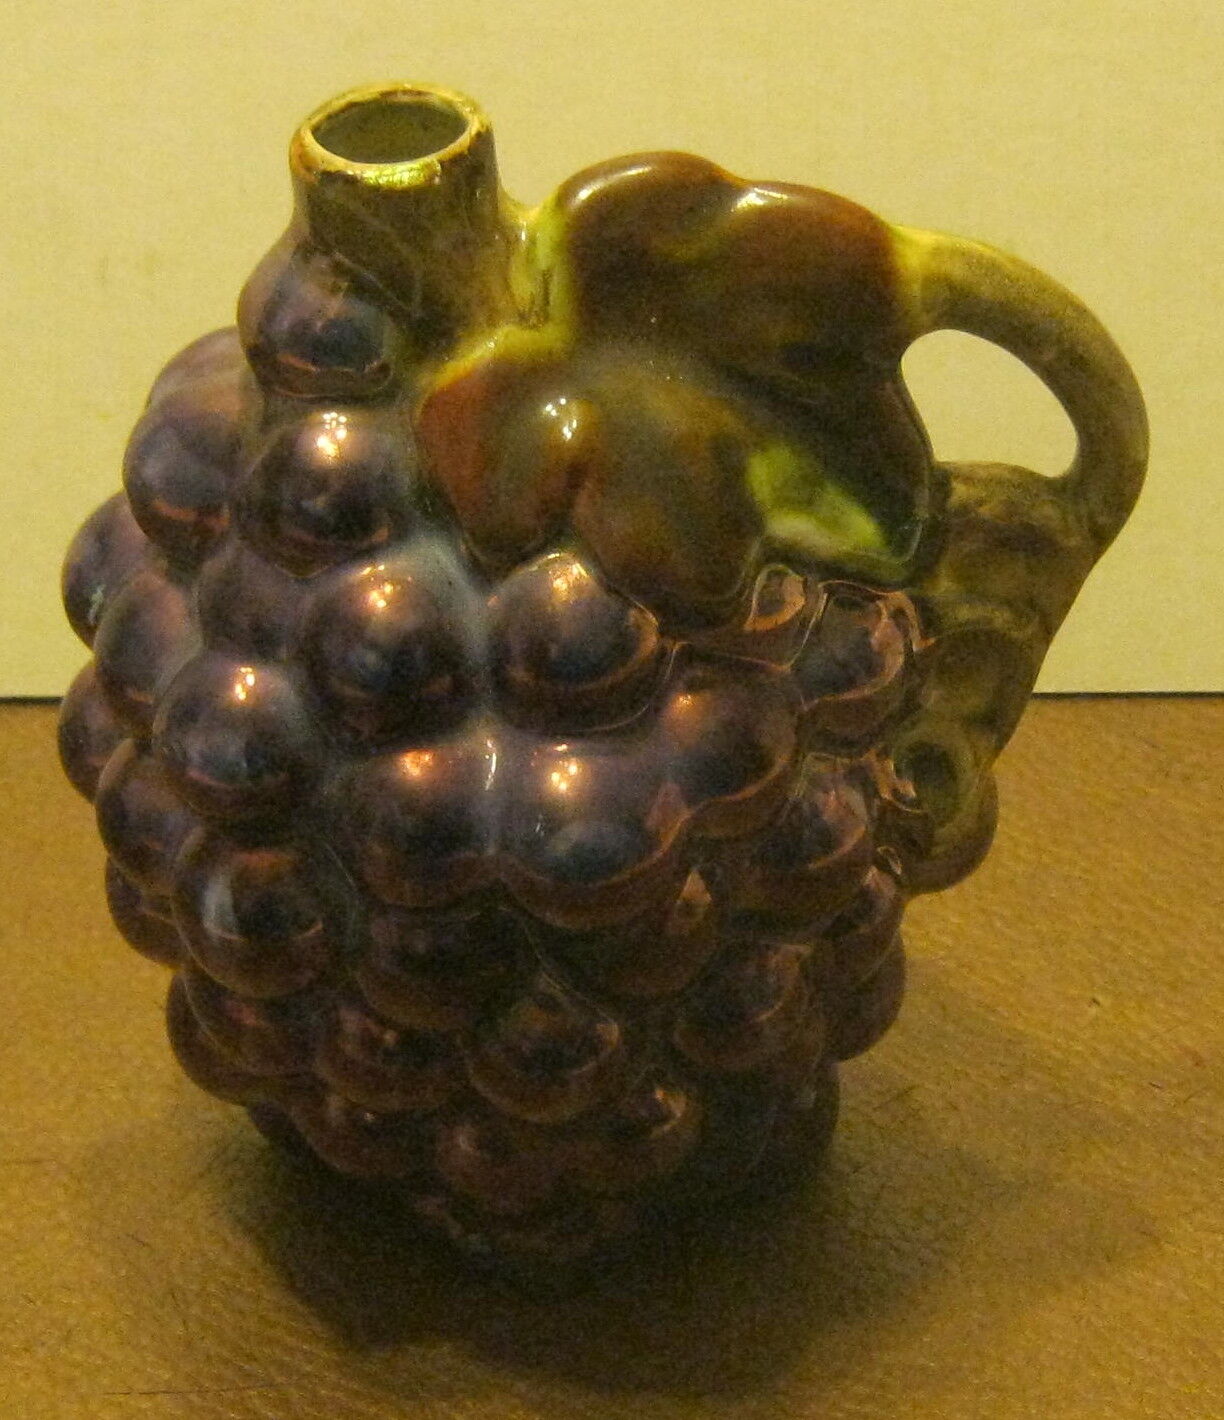 Art Pottery Bunch of Grapes Small Pitcher SIGNED Frances DATED 1964 NICE